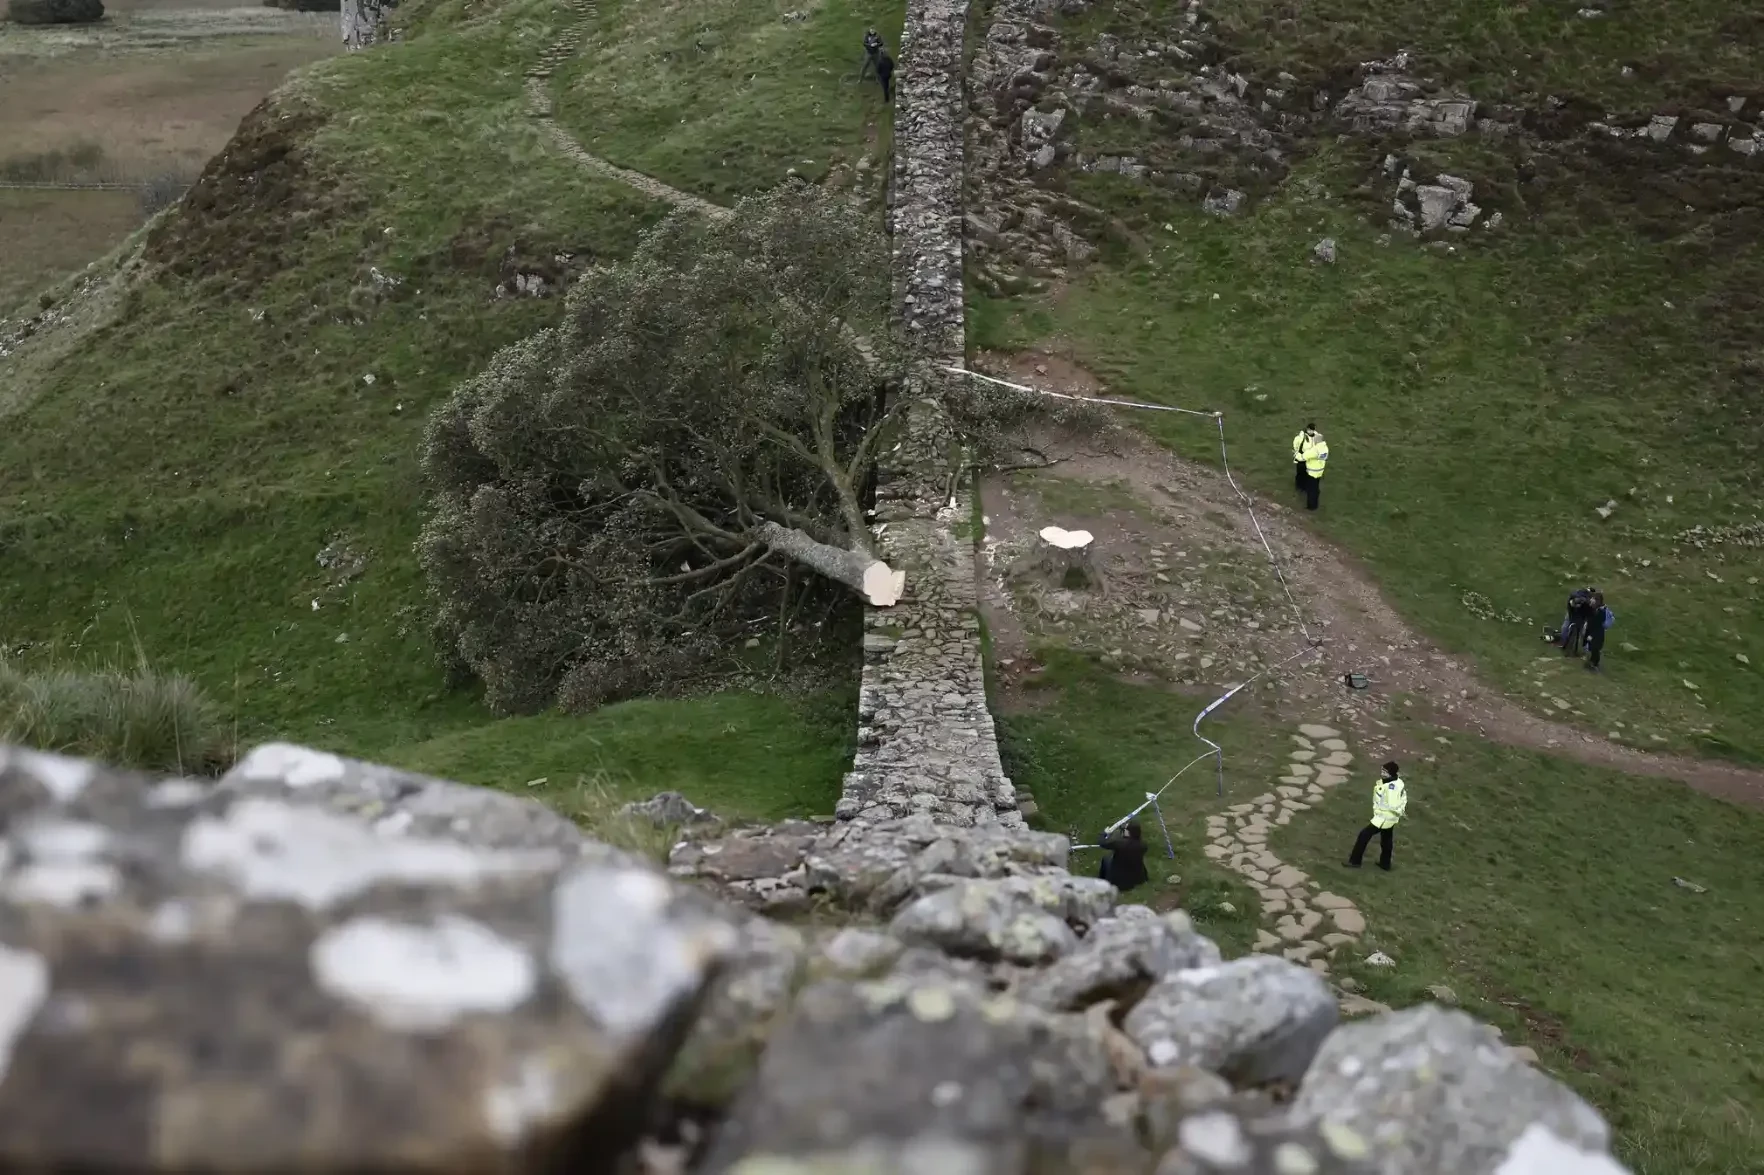 The iconic sycamore tree, cut down at Hadrian's Wall.